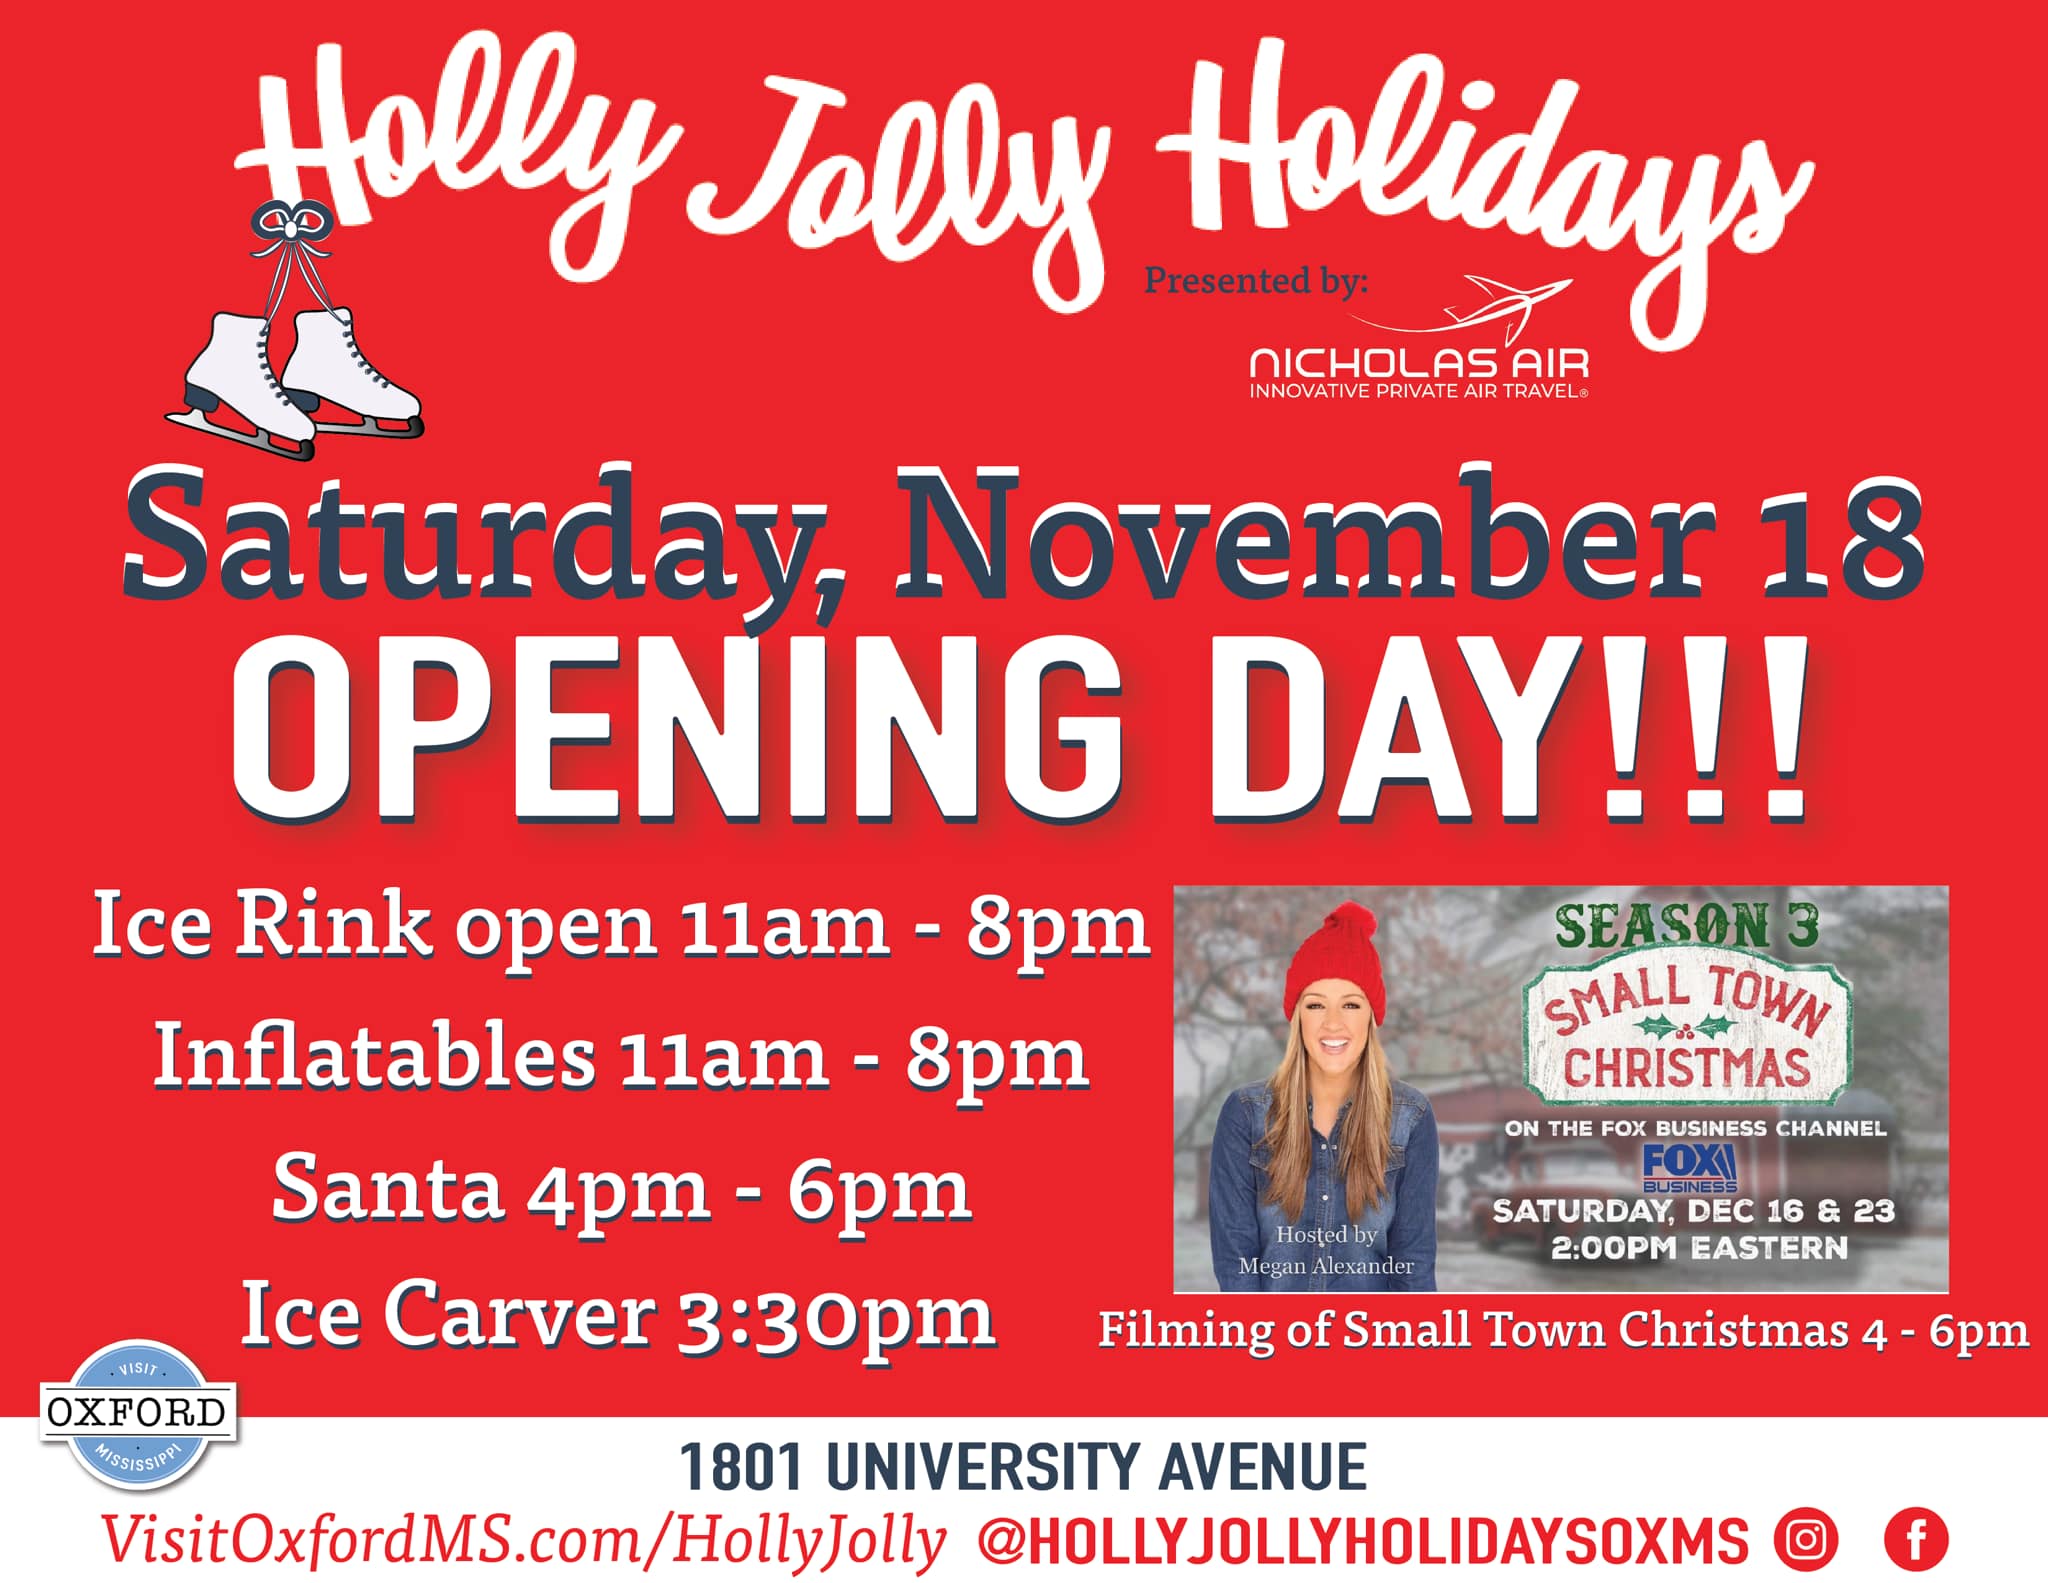 Holly Jolly Holidays Kicks Off Saturday with the Opening of the